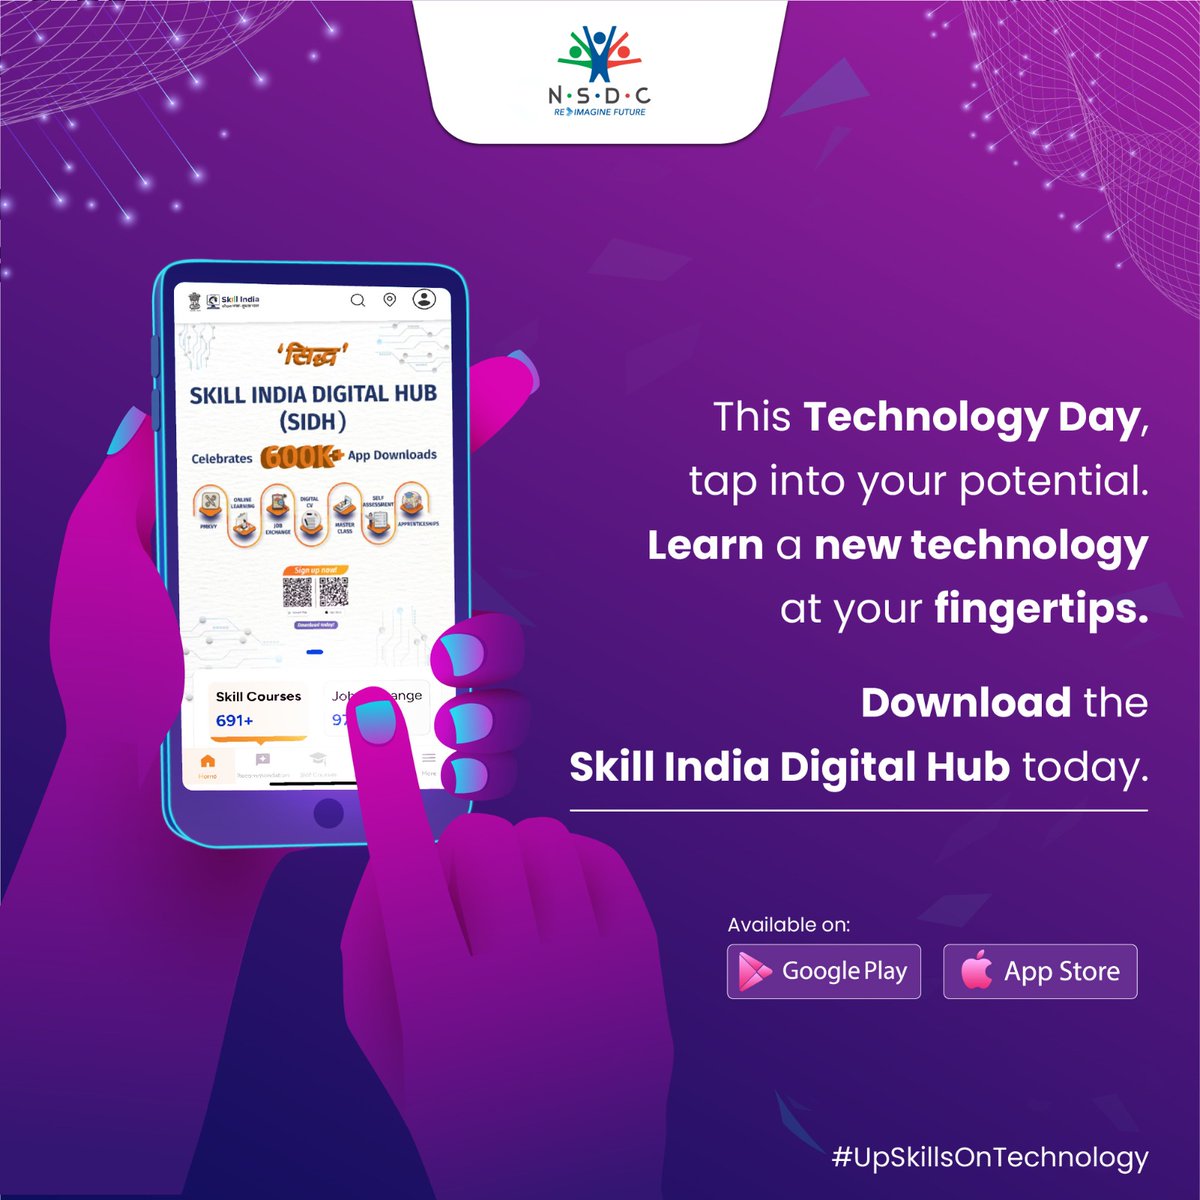 Let's kickstart this journey with something epic—how about diving into the @SkillIndDigital app? Think of it as your personal mentor, guiding you through the exciting world of technology and innovation. Plus, who doesn't love levelling up their skills while chilling on the